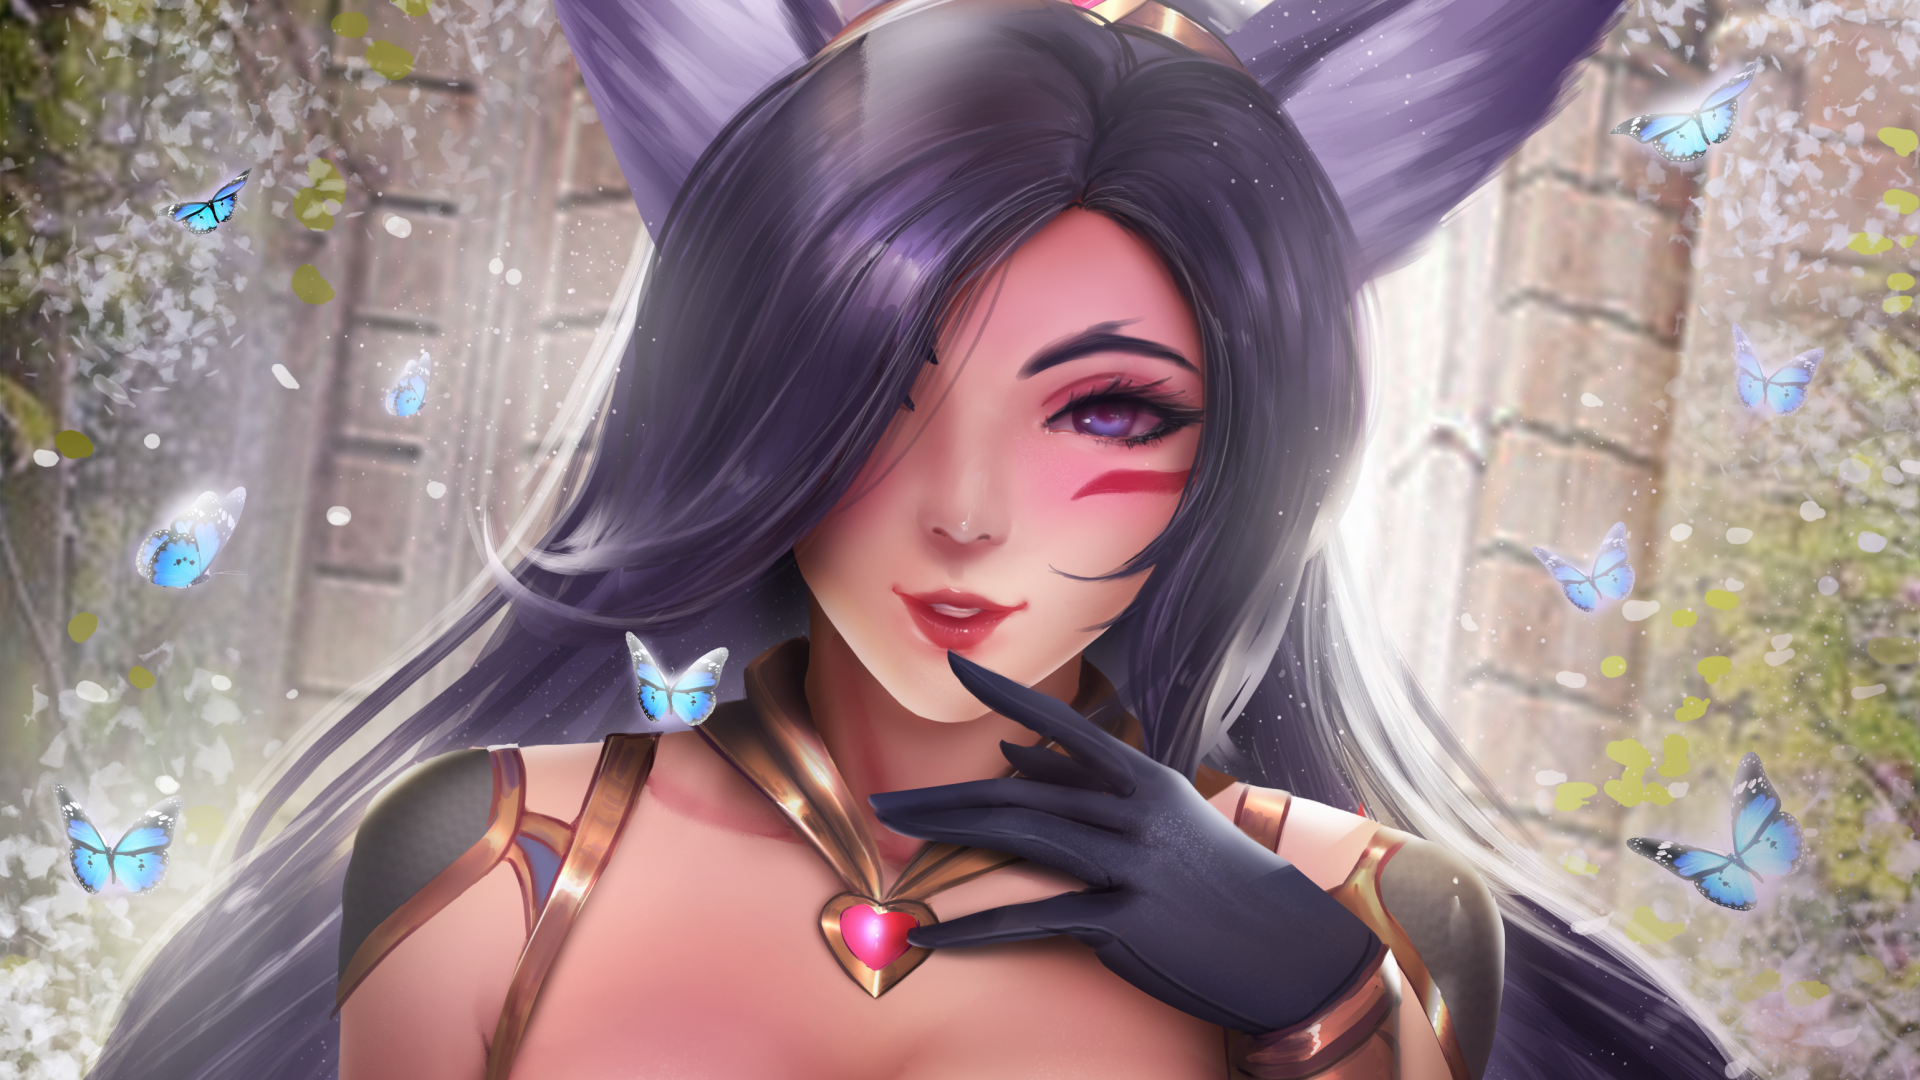 General 1920x1080 League of Legends K/DA PC gaming video game art video game girls purple eyes gloves red lipstick looking at viewer fantasy art fantasy girl butterfly